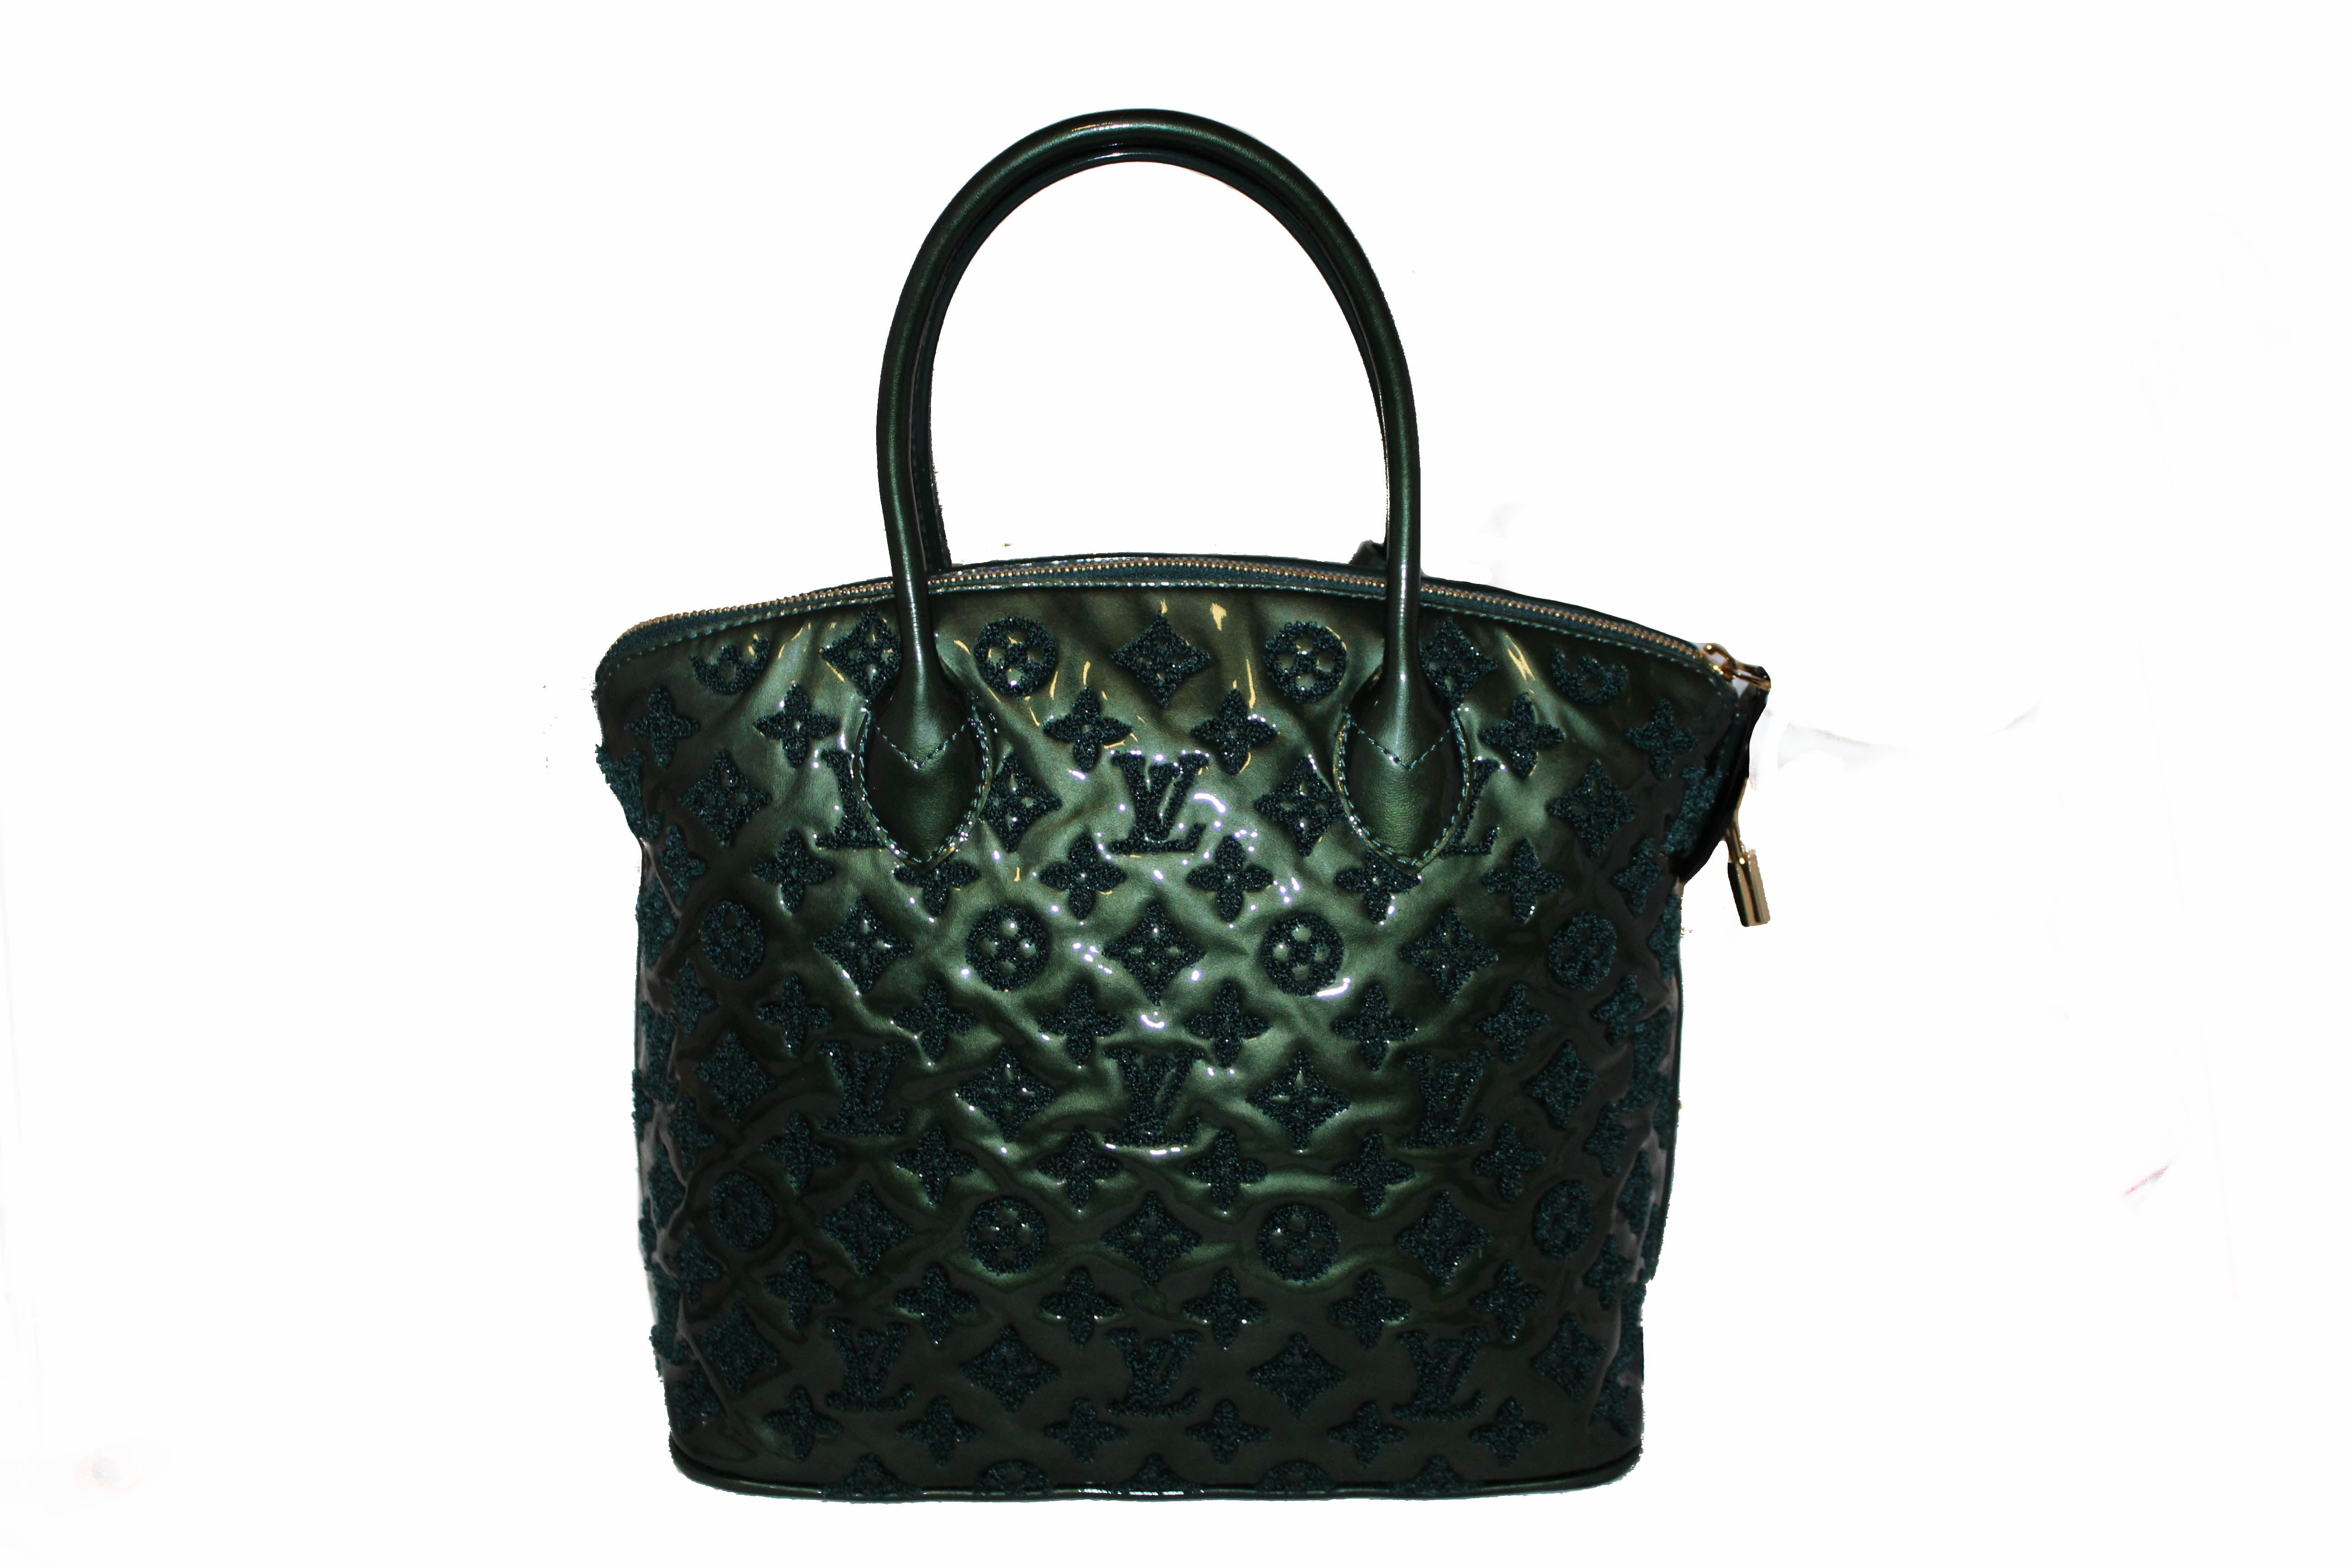 Authentic Louis Vuitton Green Monogram Limited Edition Green